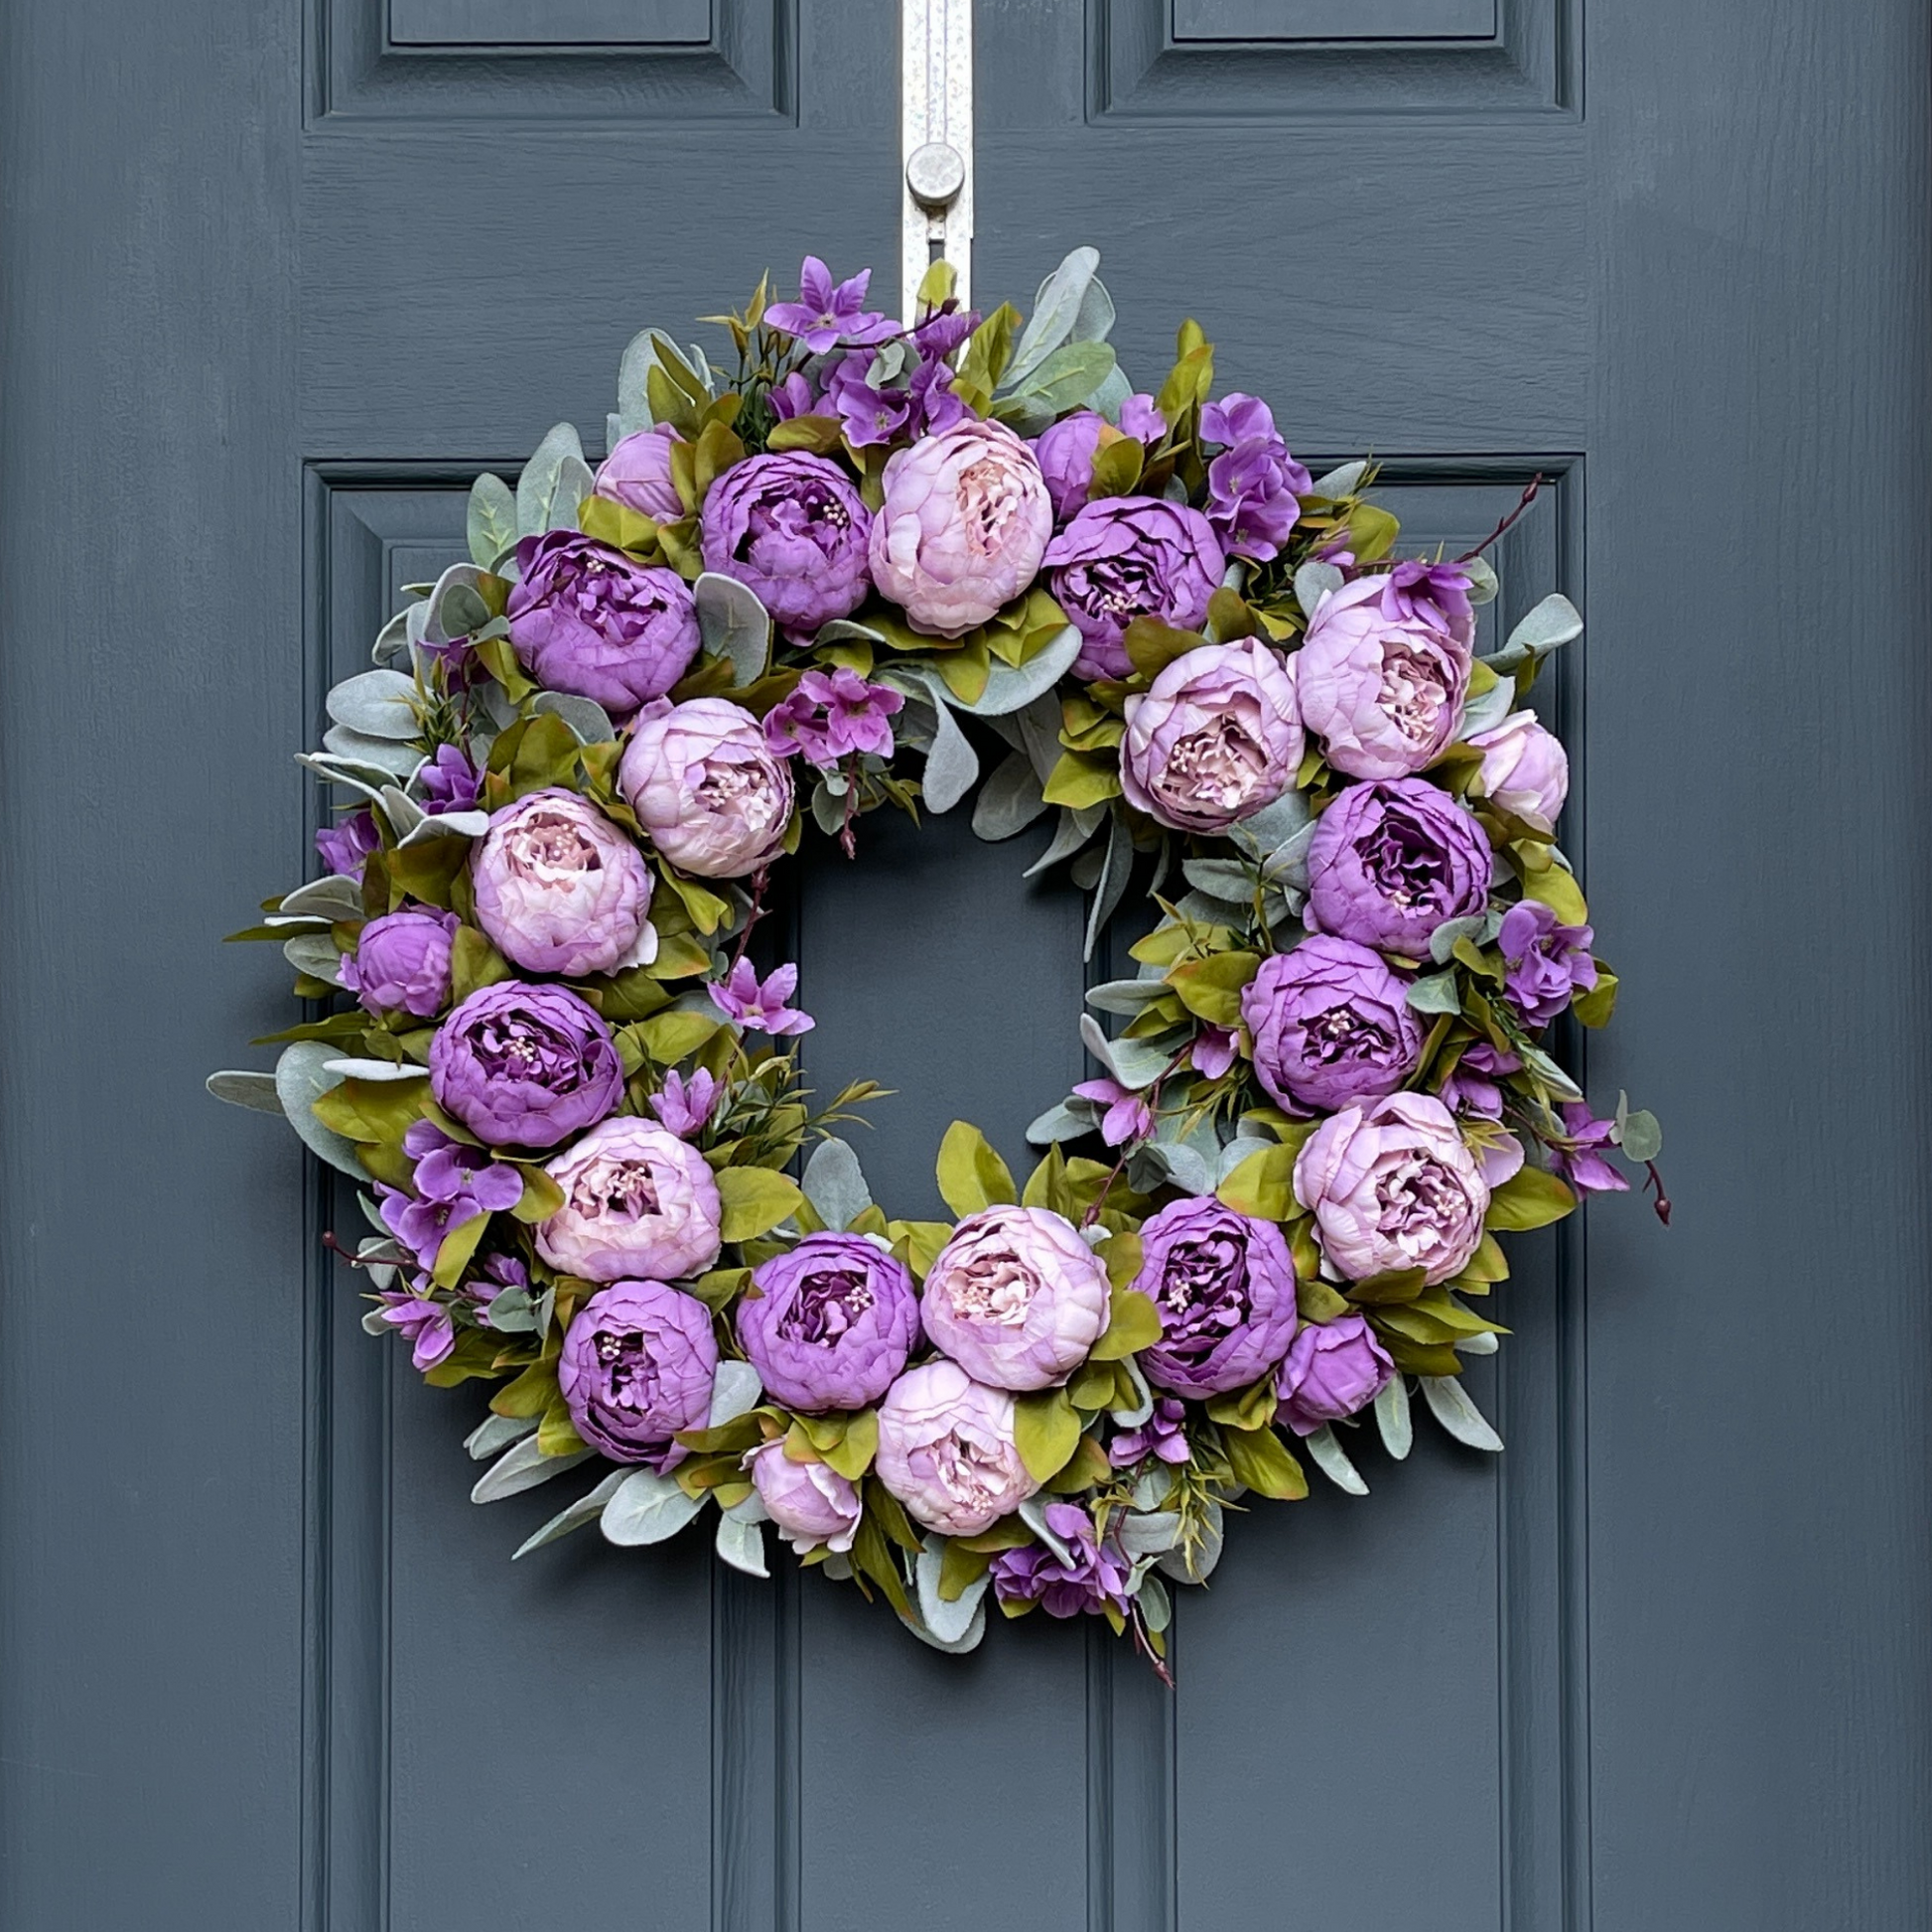 24" spring wreath. Wreath features two shades of purple peonies, peony buds, and hydrangeas, all on a bed of green flocked lambs ear. Wreath hangs from a gold hammered wreath hanger on a dark blue front door.